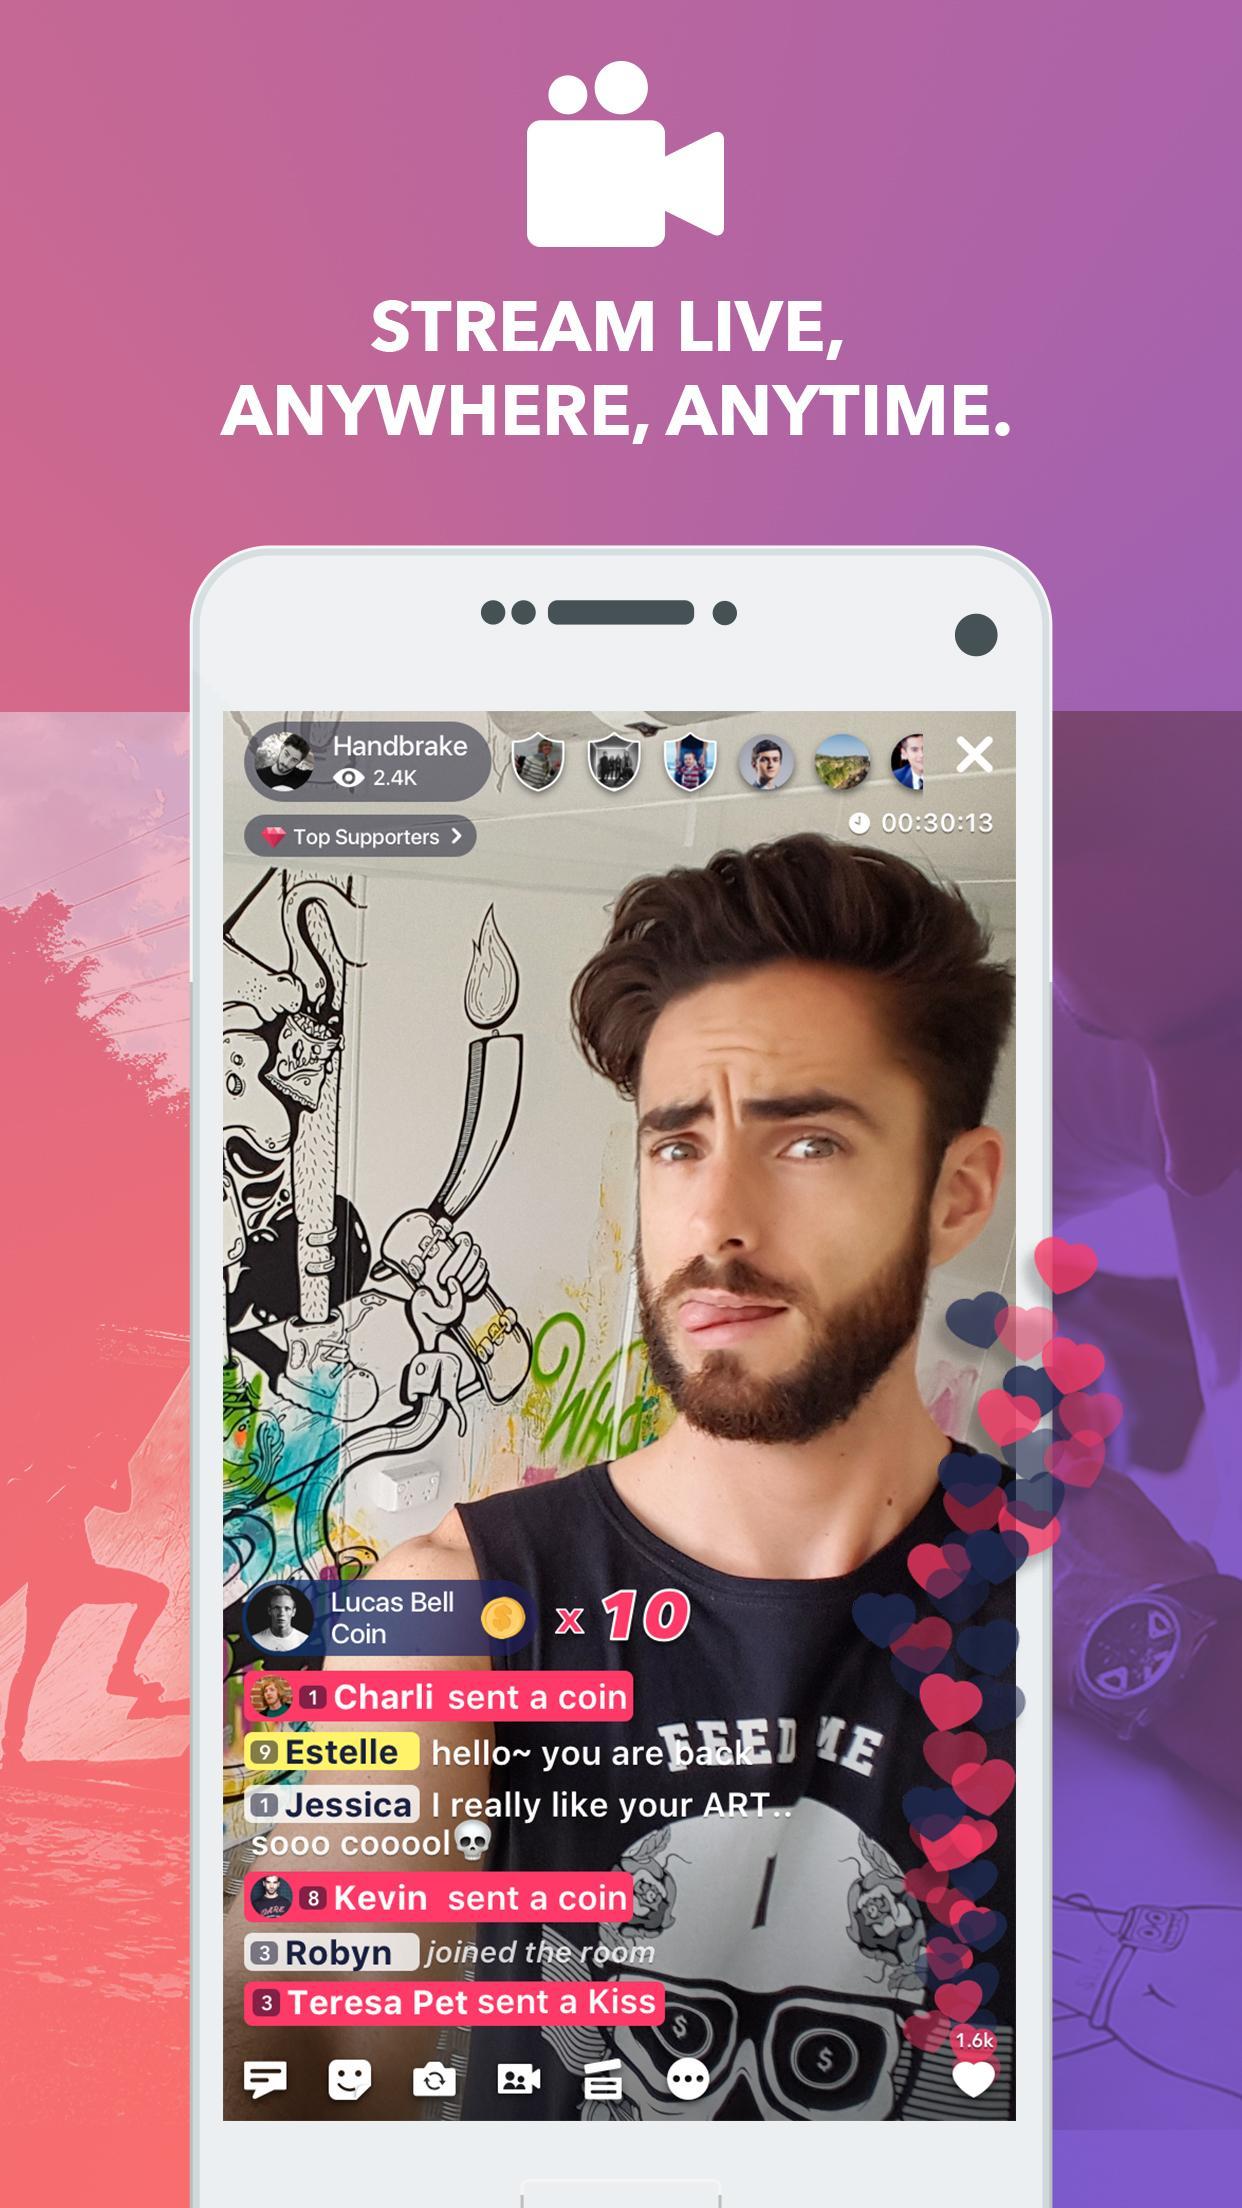 PocketLIVE - fun live video chat rooms and shows for Android - APK Download